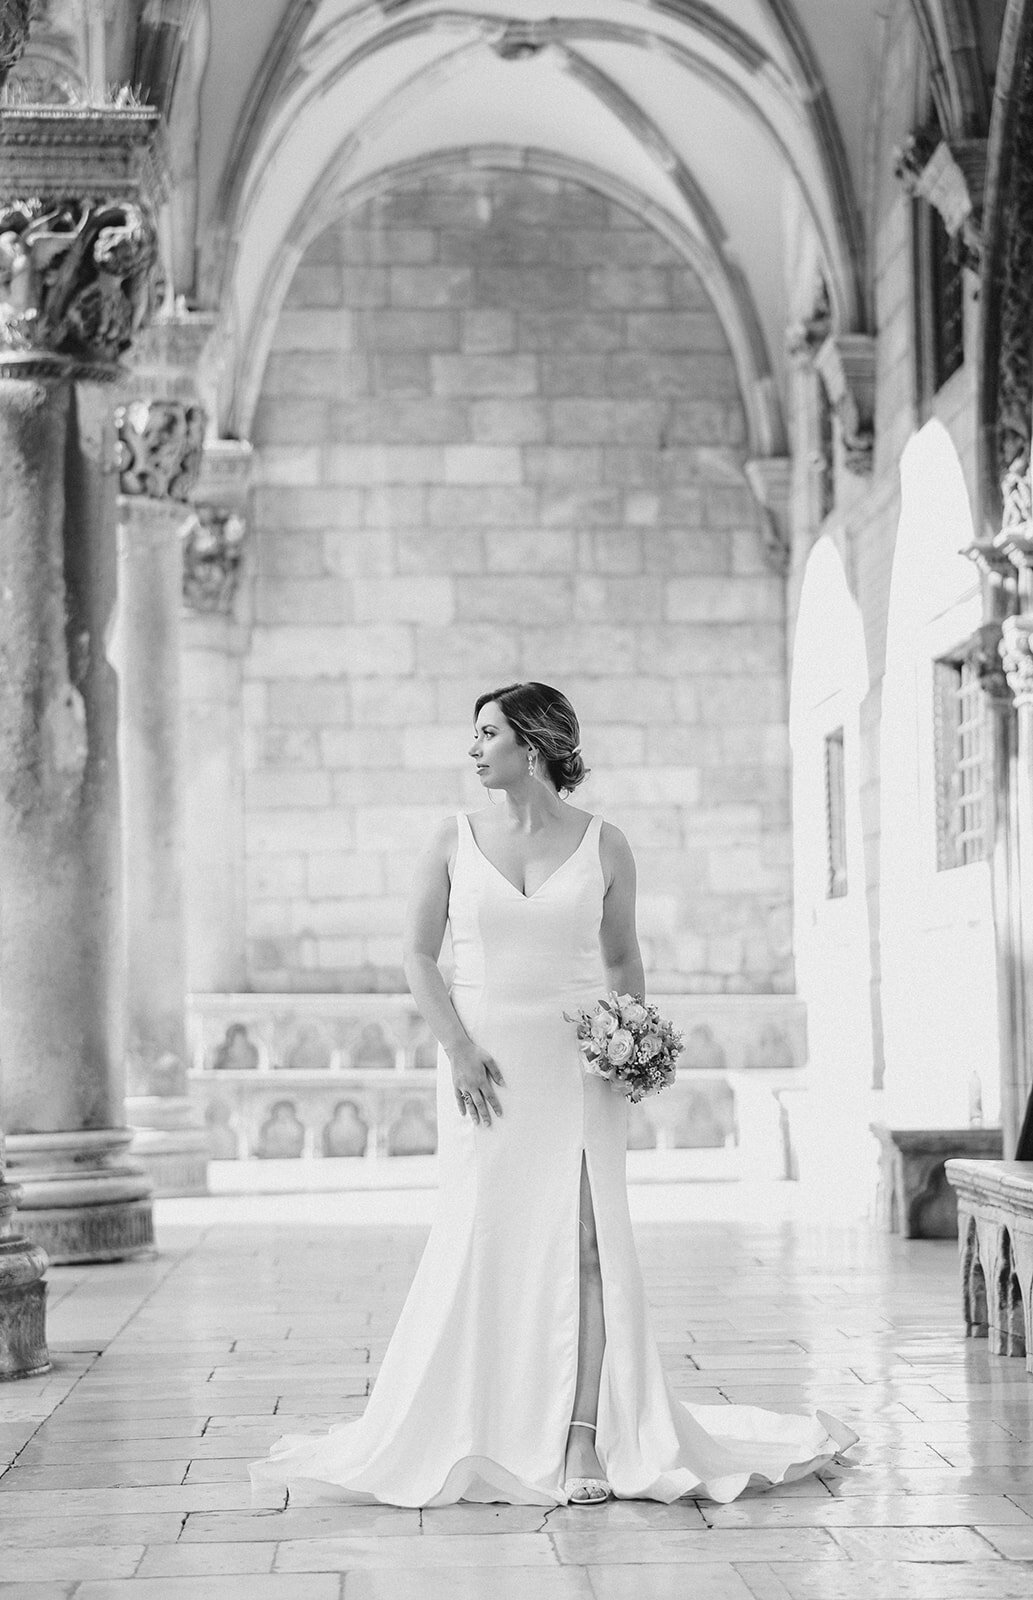 Explore the allure of a destination wedding in Croatia with our luxury wedding planning services. Immerse yourself in the beauty of stunning venues and breathtaking landscapes as we curate your dream wedding. Contact us for a seamless and extraordinary destination wedding experience in Croatia. Your perfect day awaits.